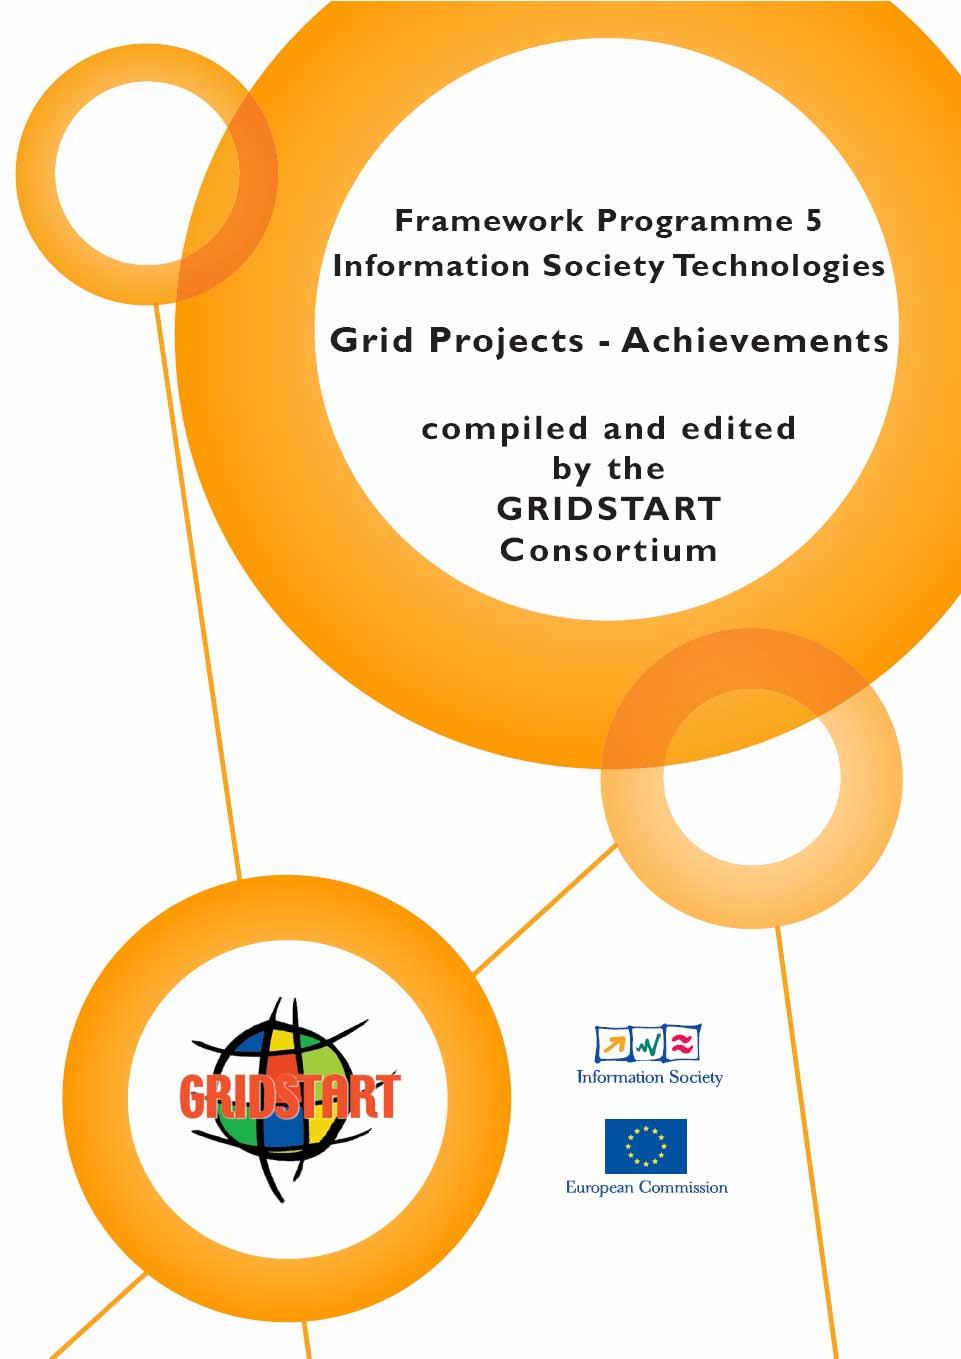 FP5 EU Grid Research Achievements Creation of a strong Grid research community Europe s position strengthened related to Grid middleware development Contribution to standardisation Leading position